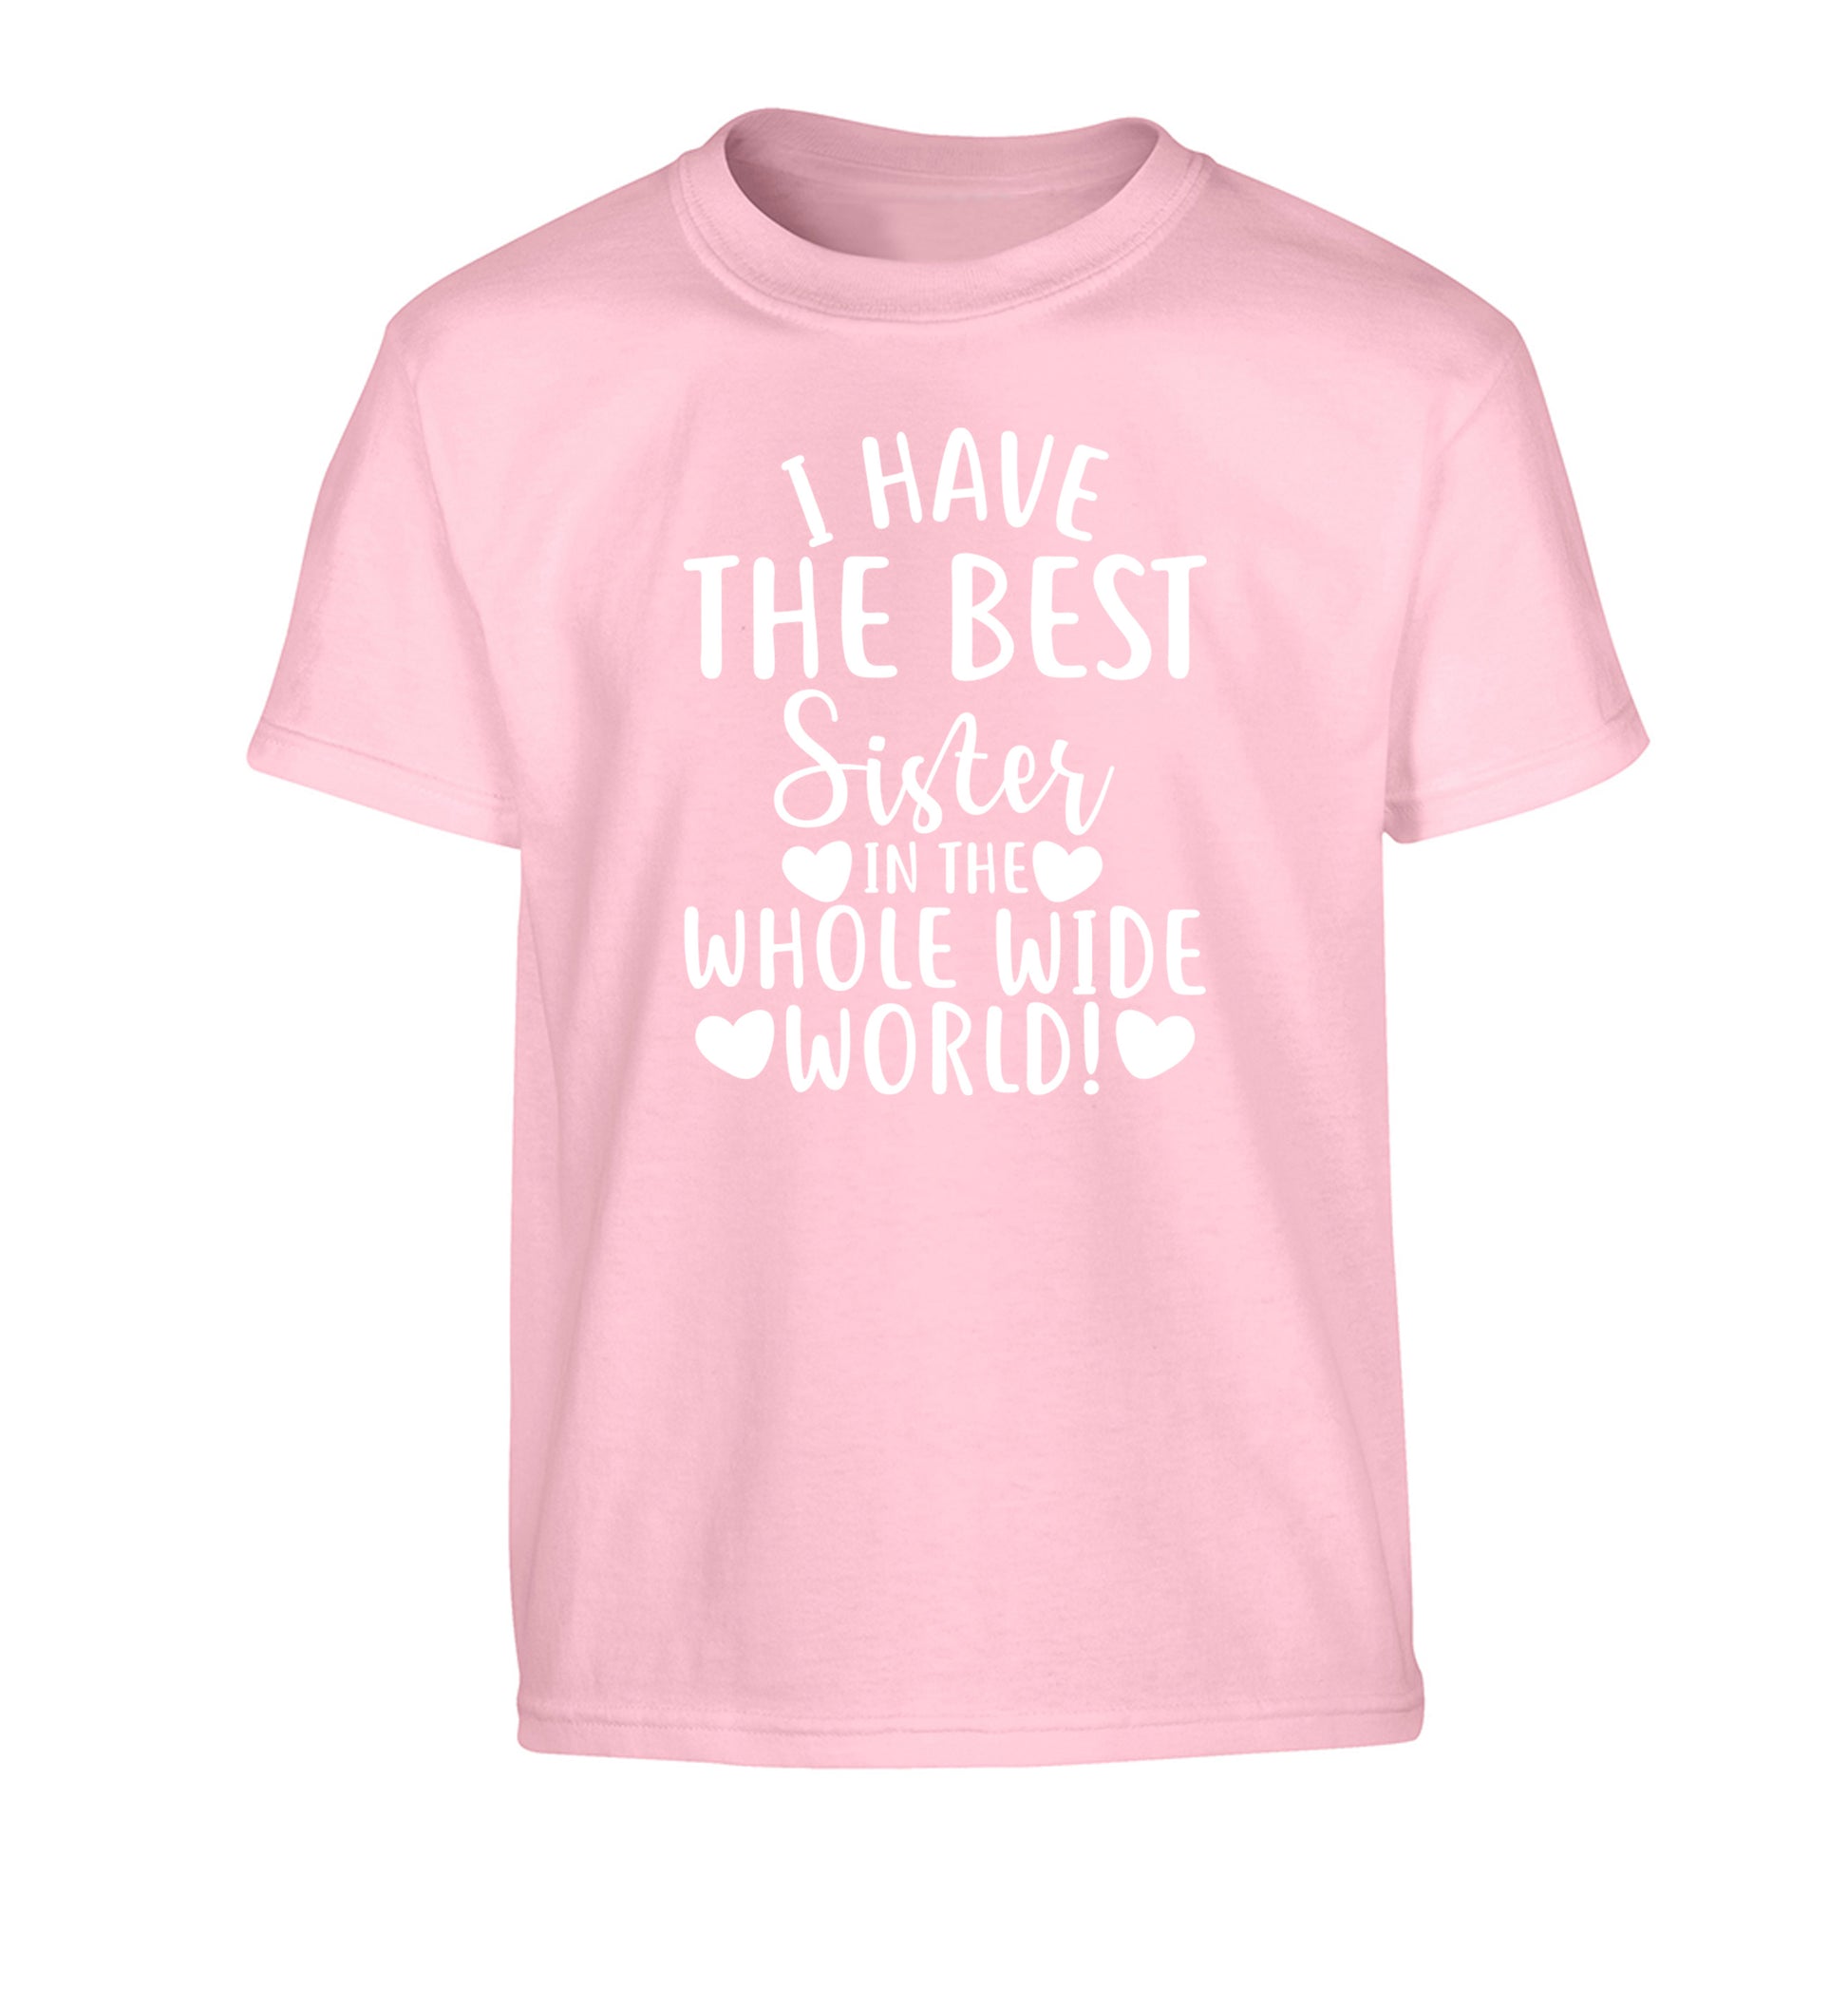 I have the best sister in the whole wide world! Children's light pink Tshirt 12-13 Years